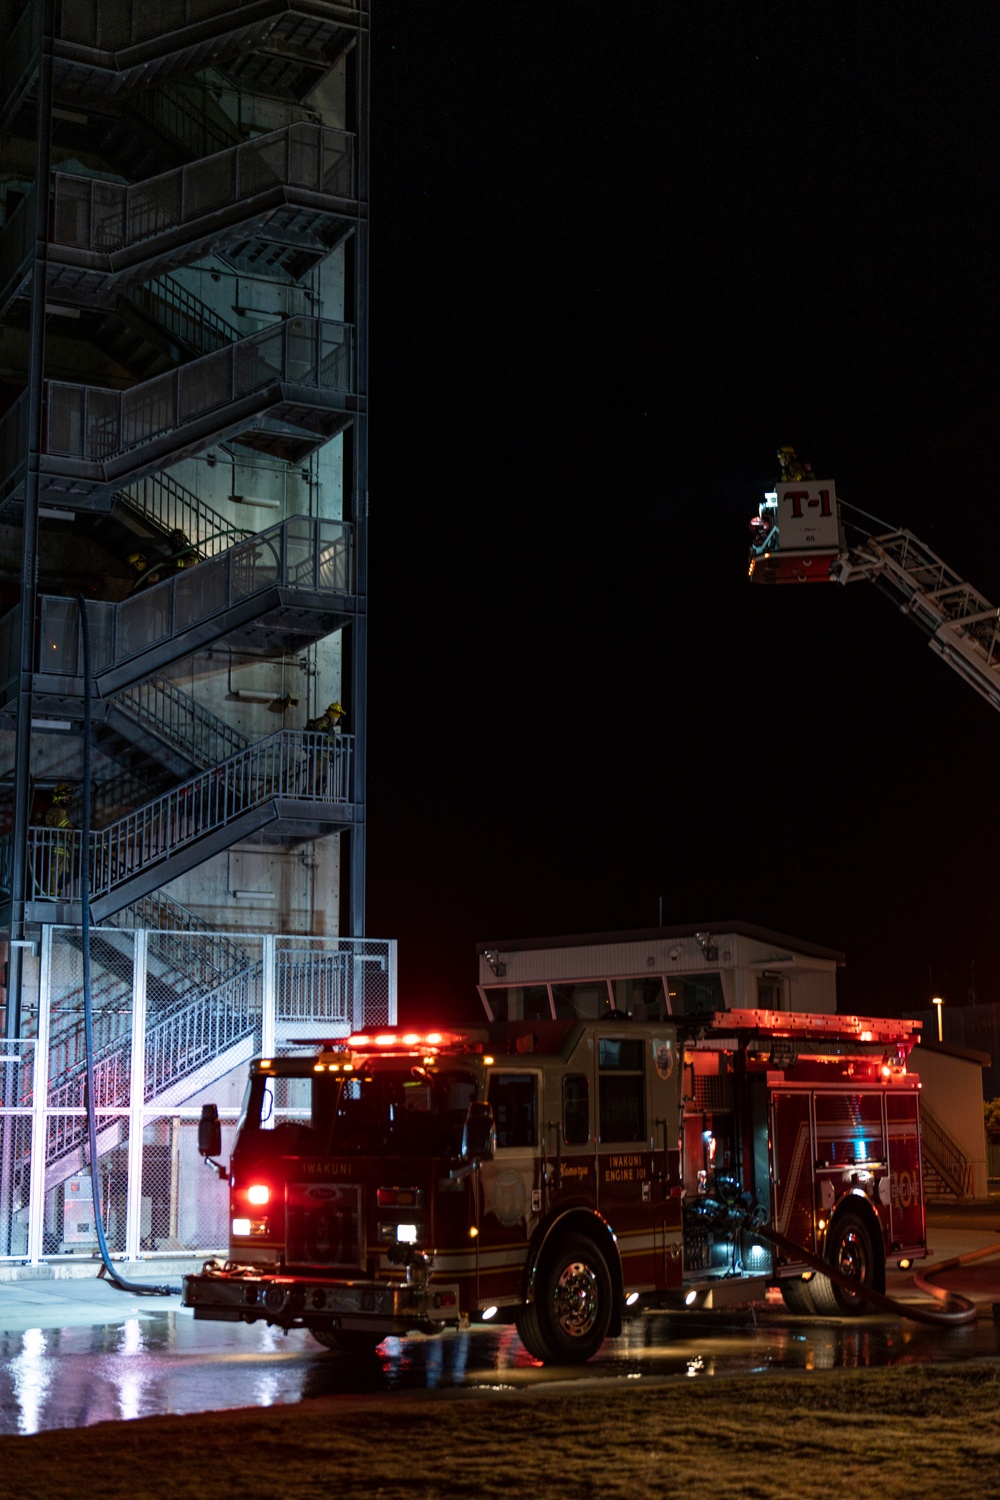 Exercise Active Shield 2022: Air station fire department responds to simulated structure fire